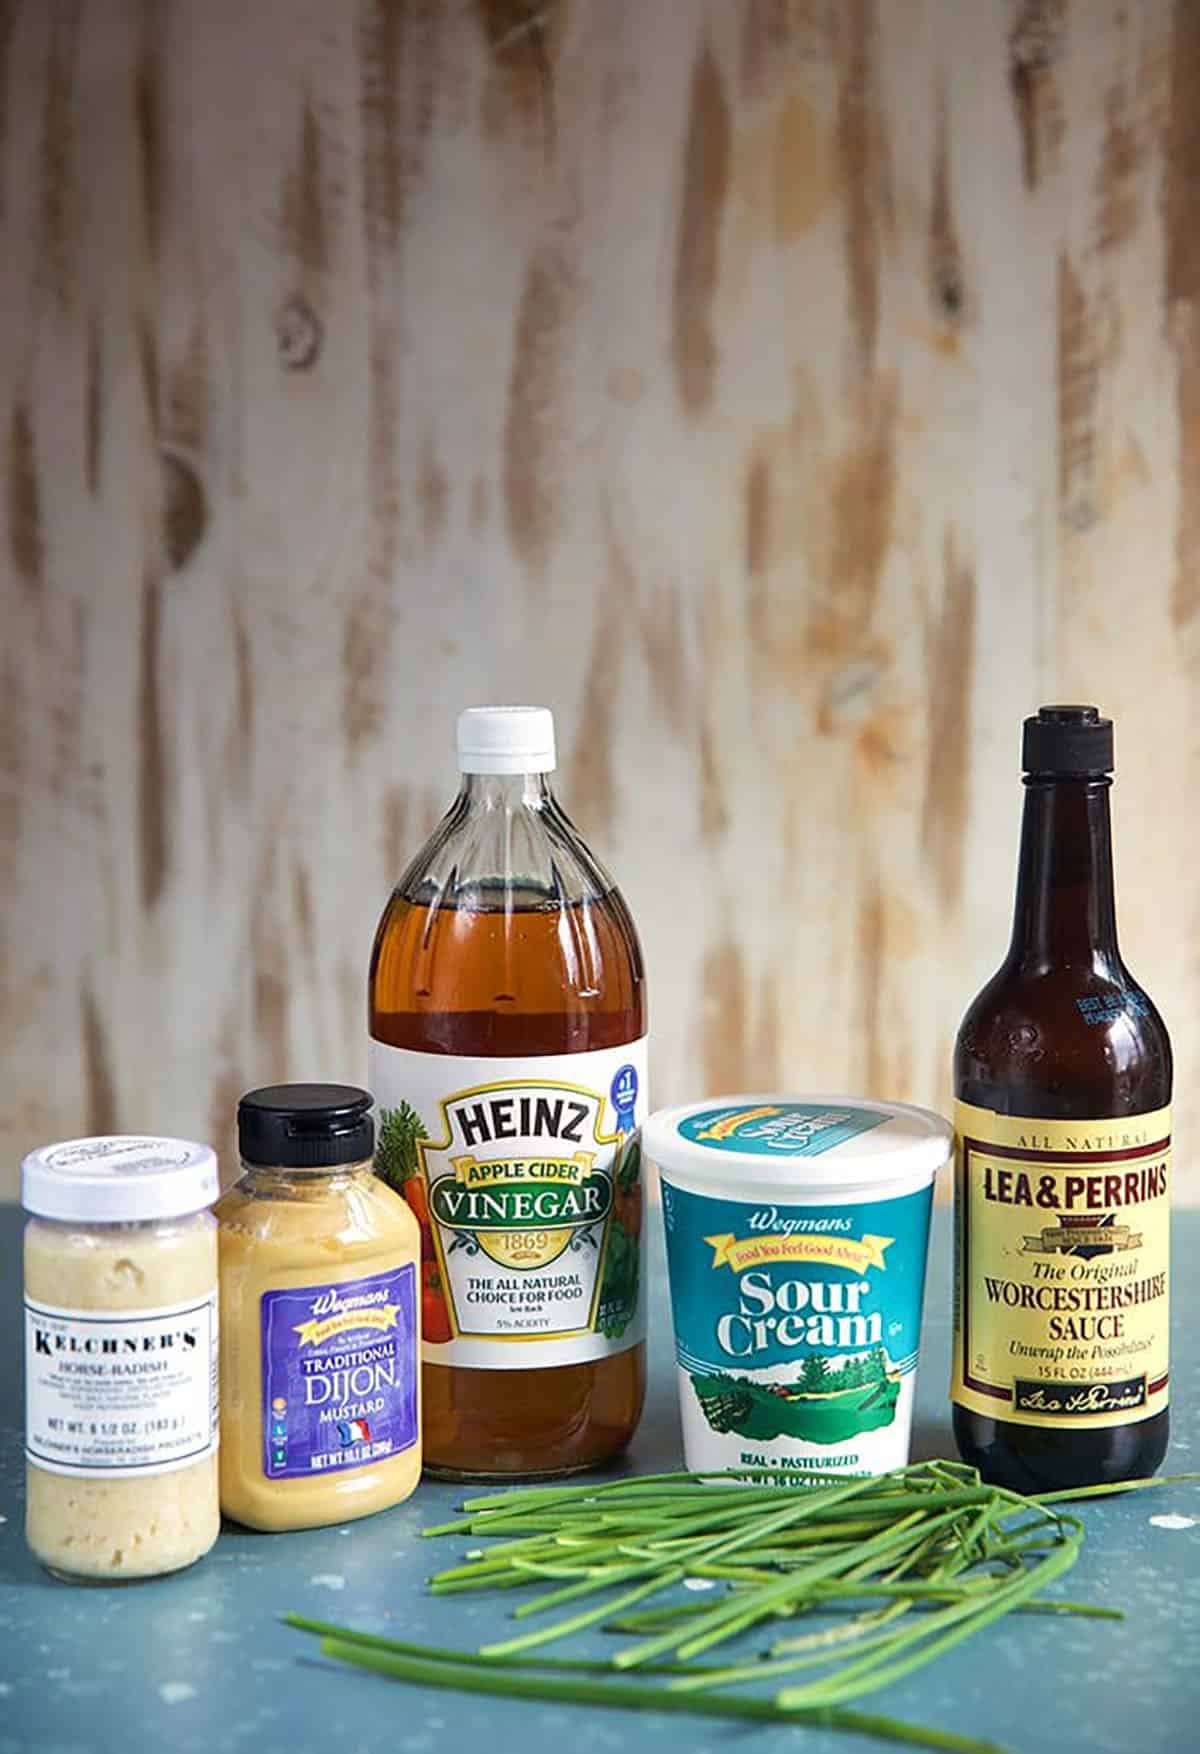 Ingredients for Creamy Horseradish Sauce, a bottle of horseradish, dijon mustard, apple cider vinegar, sour cream Worcestershire sauce and chives.